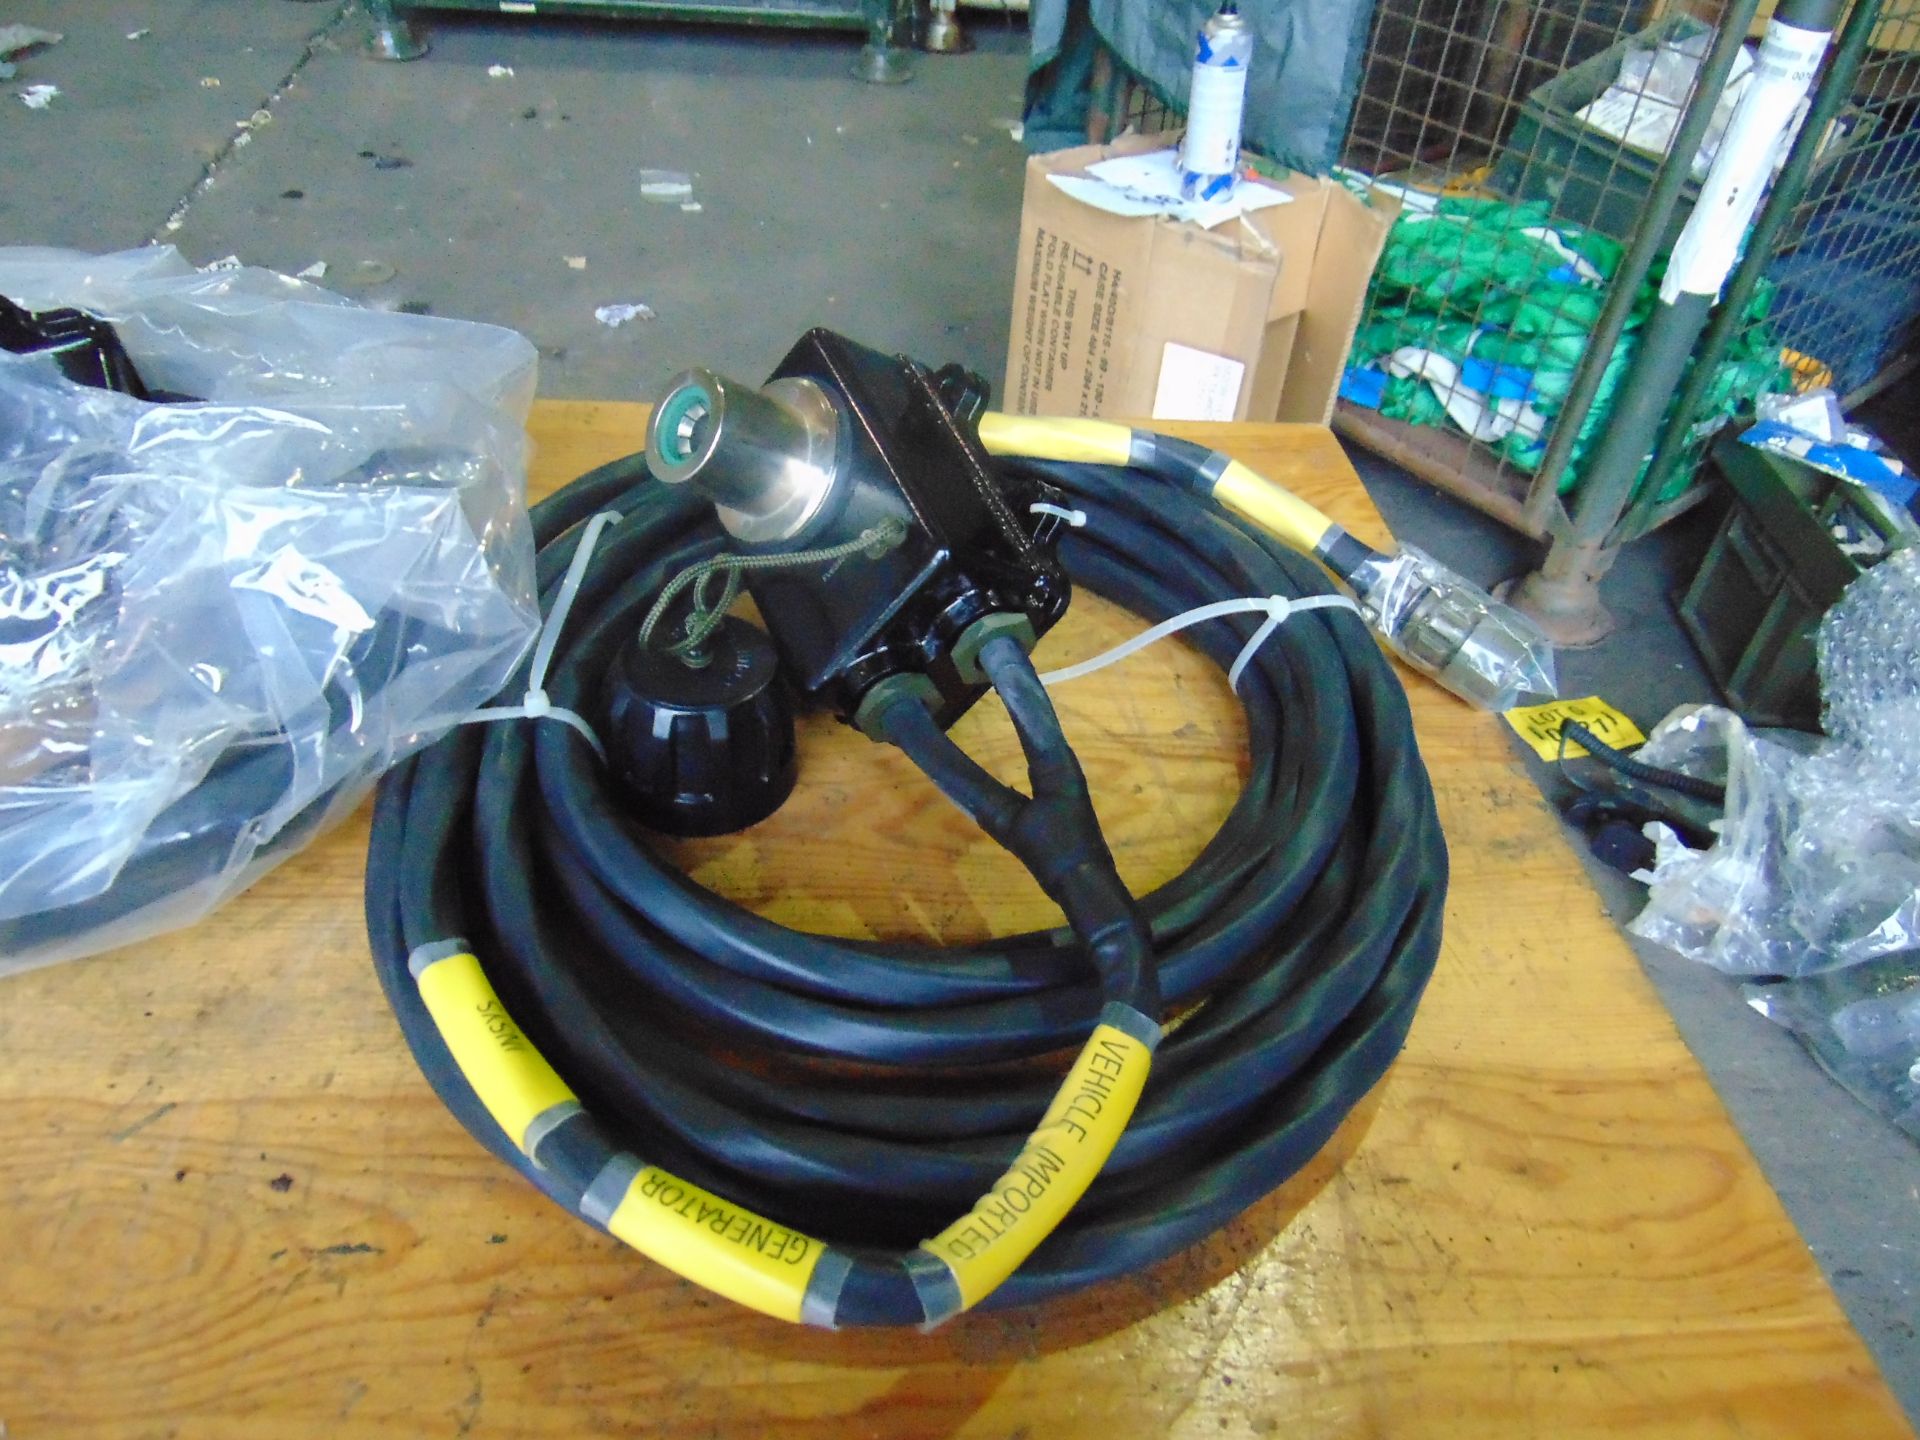 2x New Unissued Vehicle Jump Start Plug and Cable Assembly - Image 4 of 5